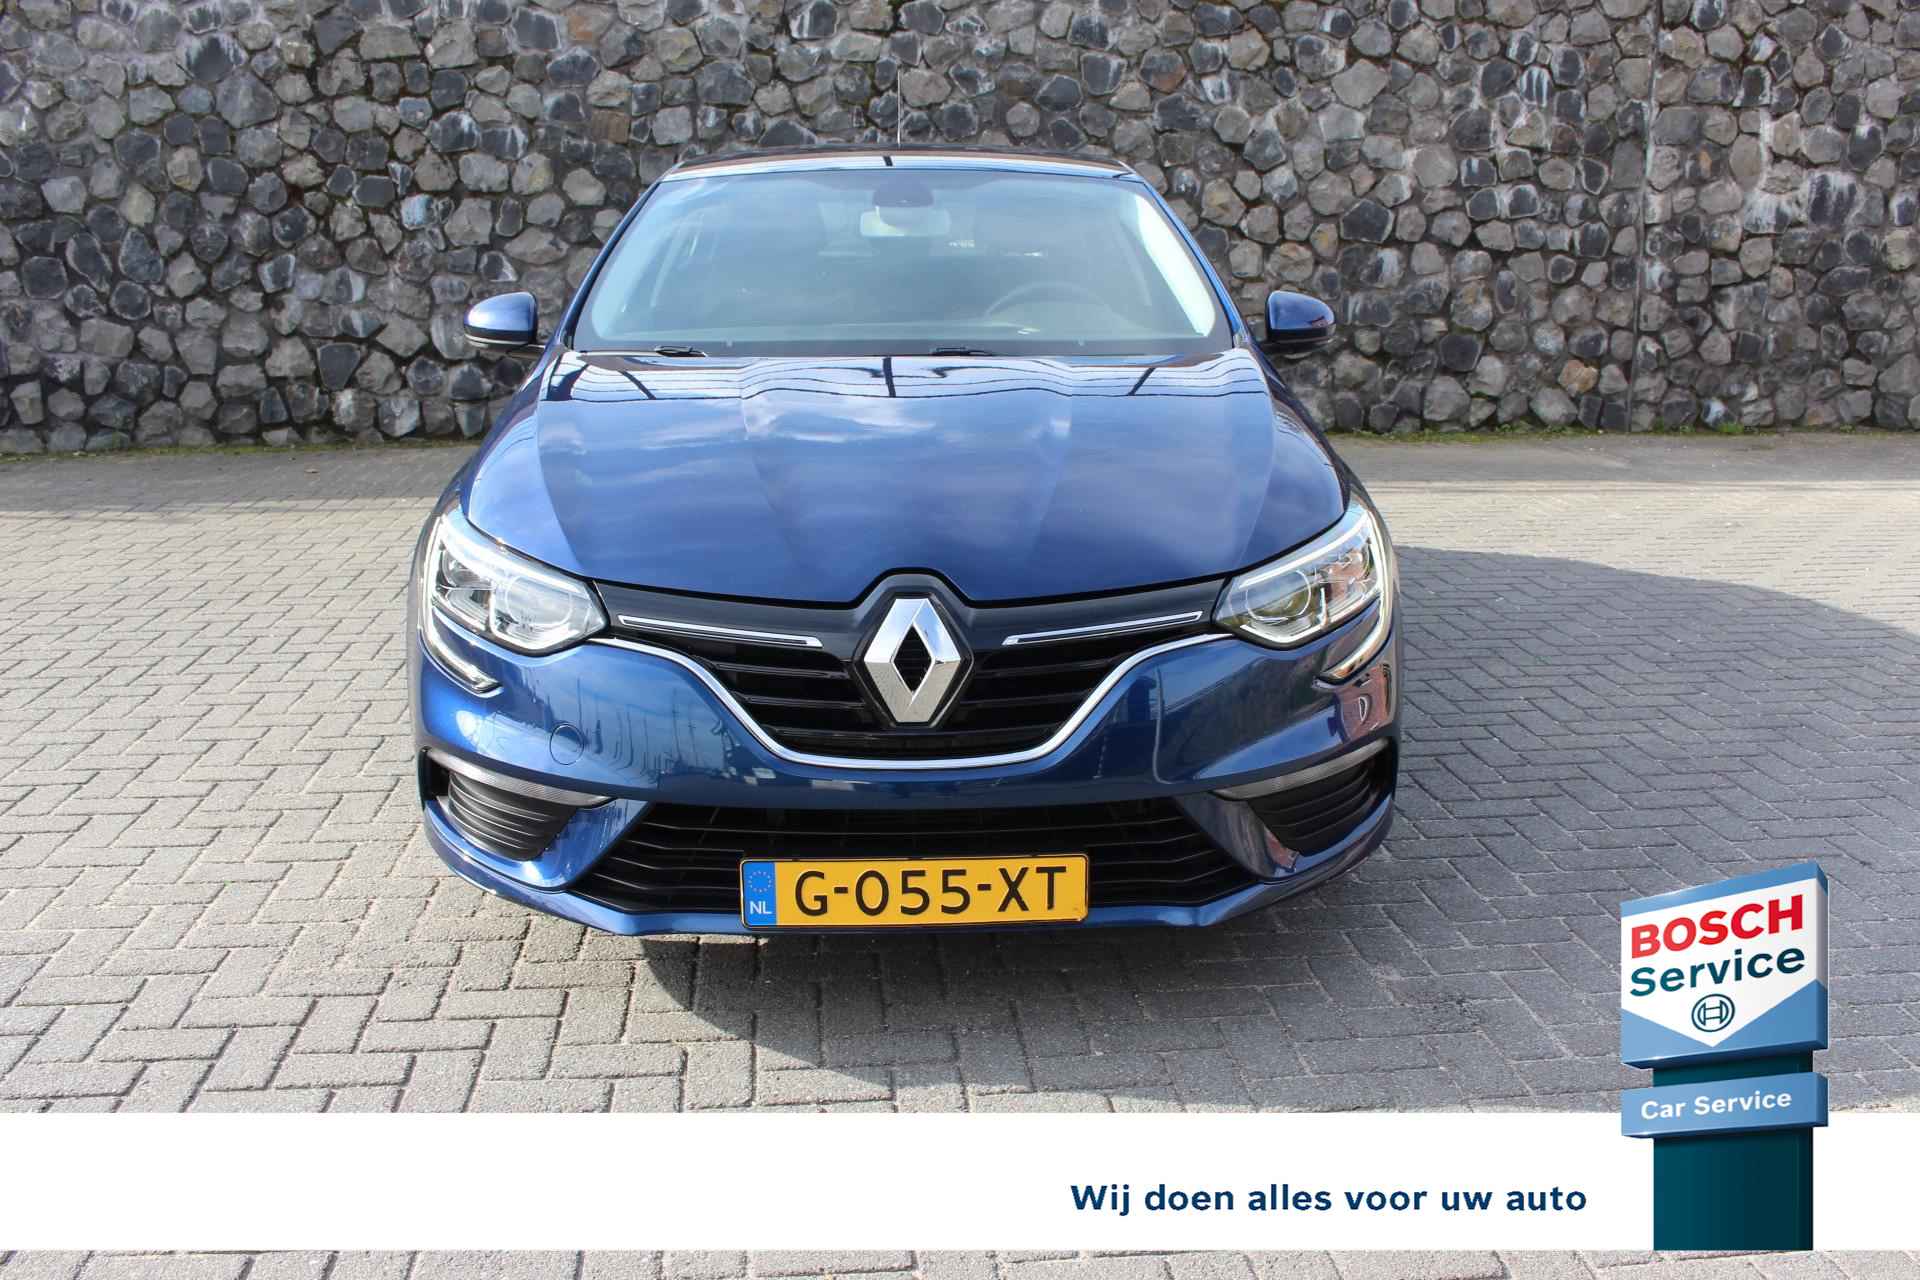 Renault Mégane 1.3 TCe Zen Dab+ audio Climate + cruise control Navi PDC achter Led verlichting voor + achter - 27/34